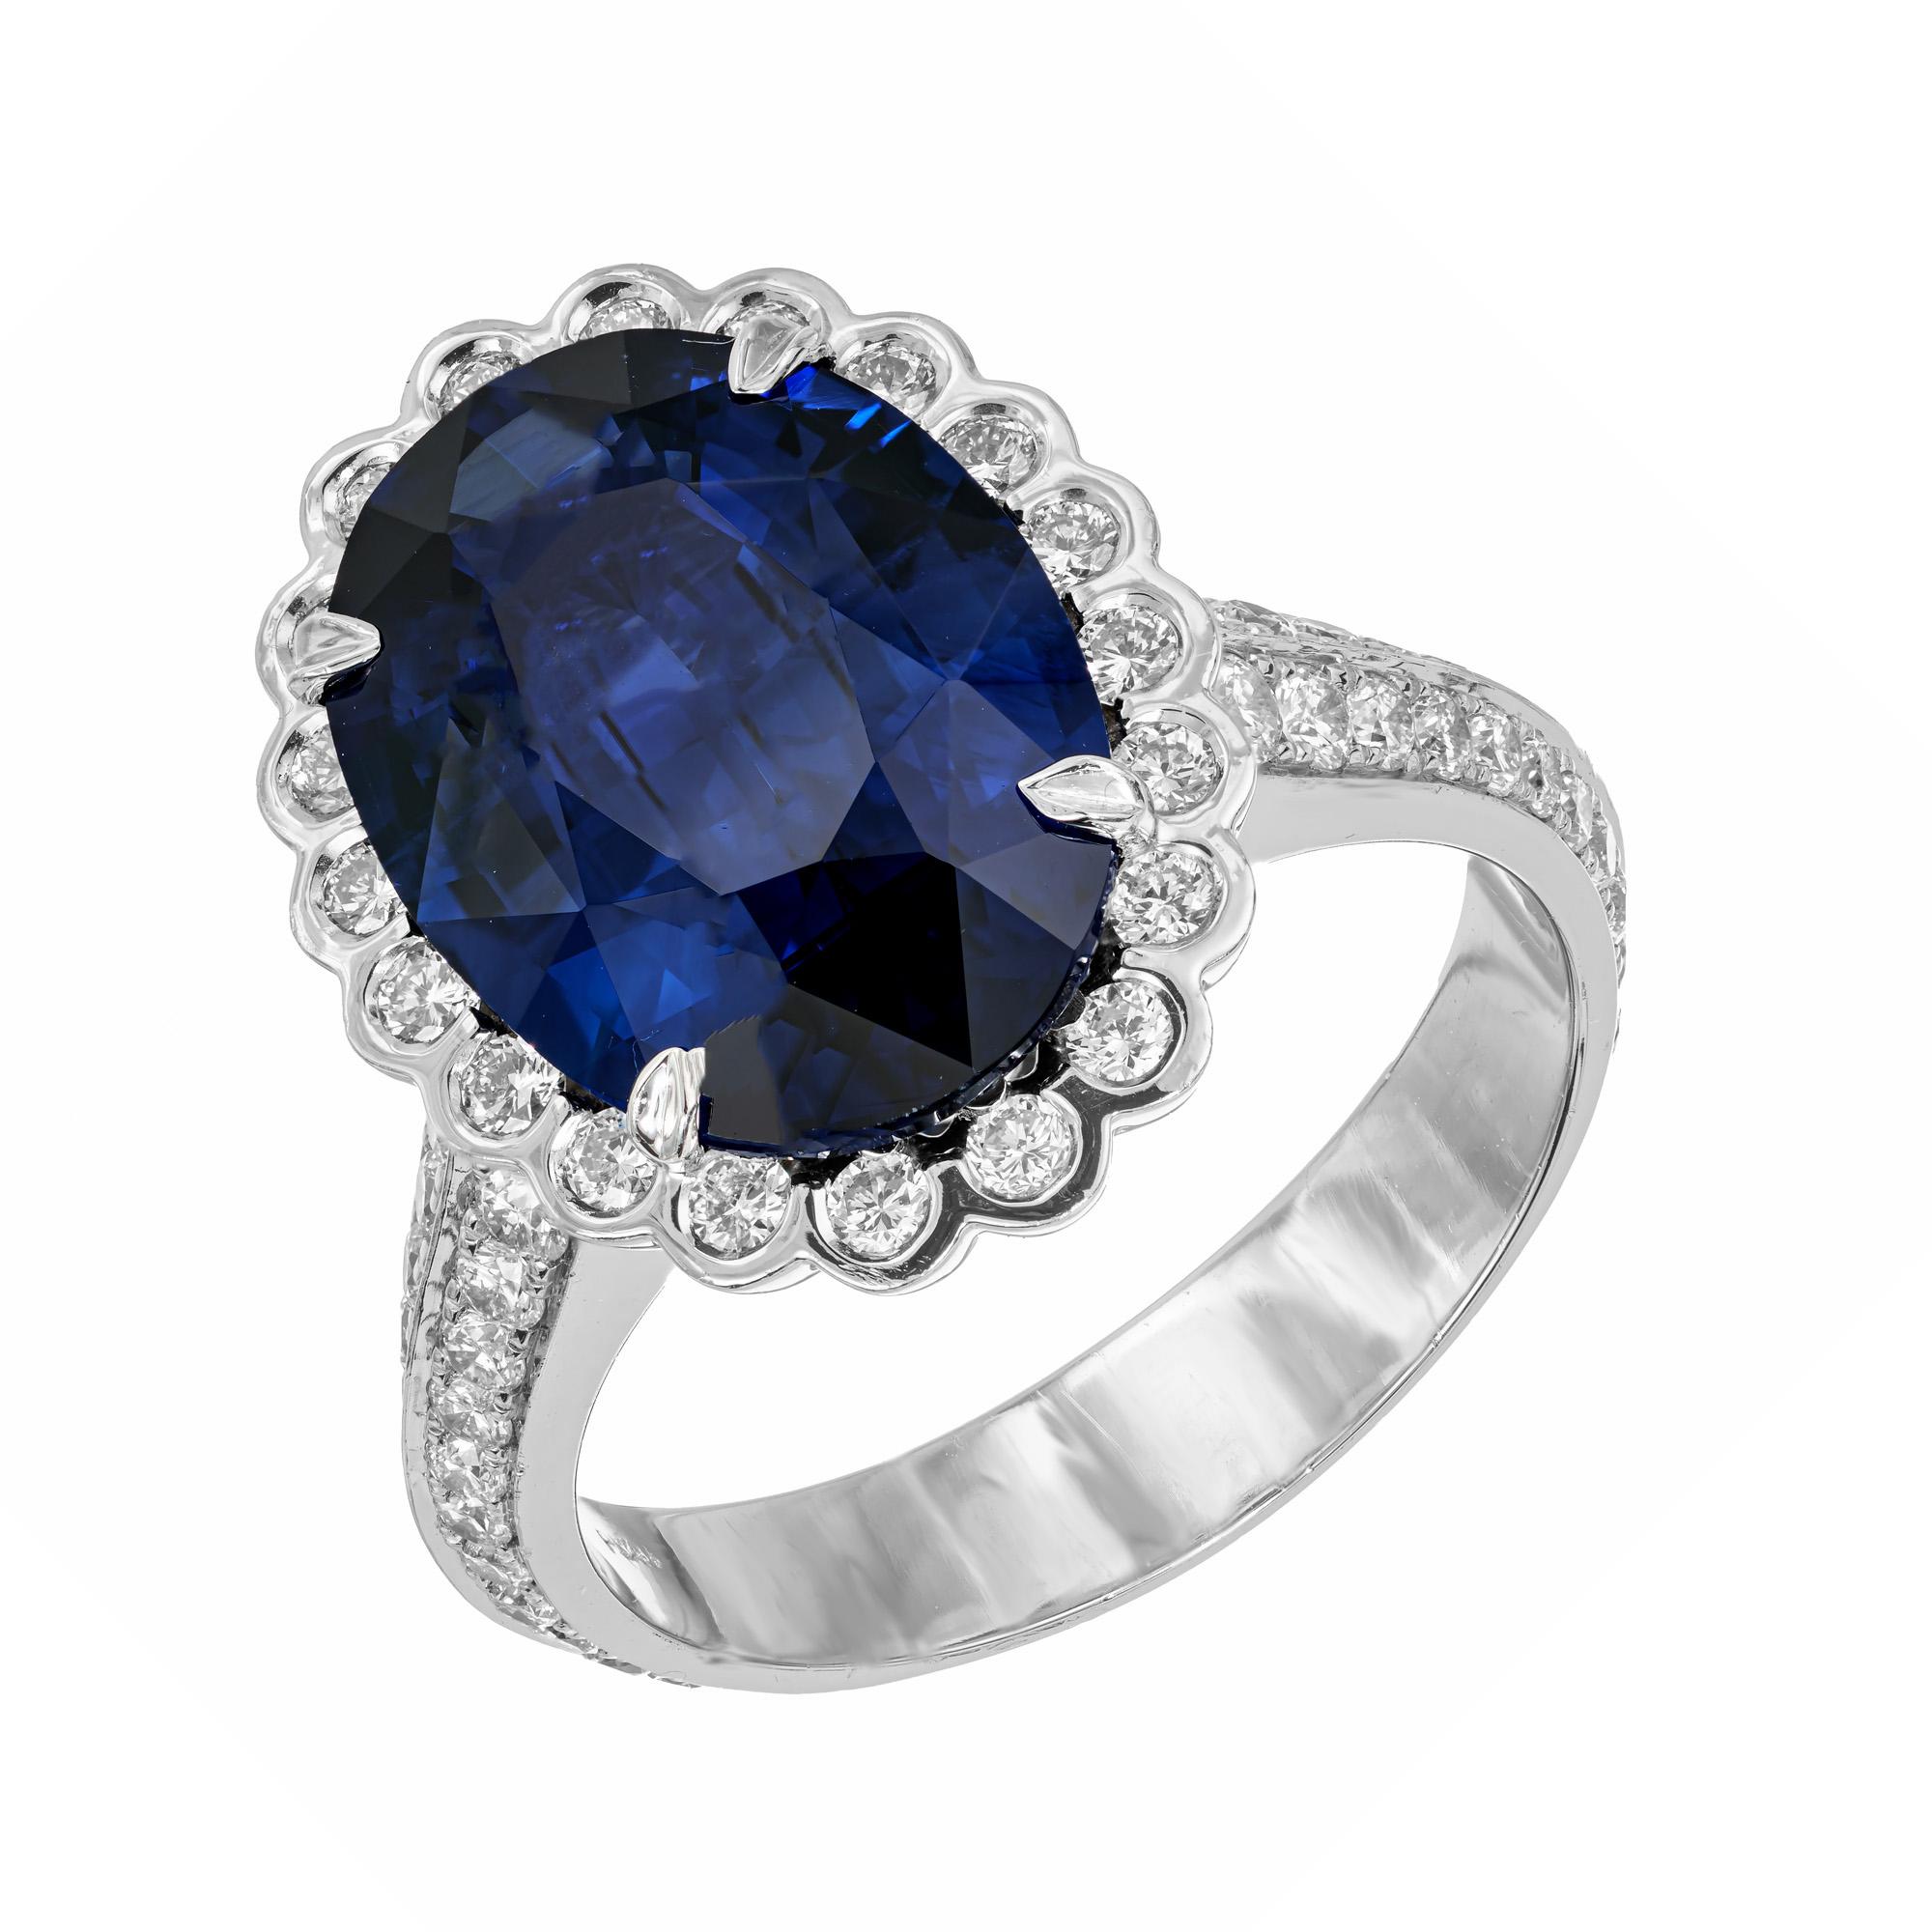 Sapphire and diamond halo engagement ring. GIA certified oval shaped deep blue center sapphire with large surface area, set in a platinum setting with a halo of round bezel set diamonds, accented with two rows of round cut diamonds along both sides